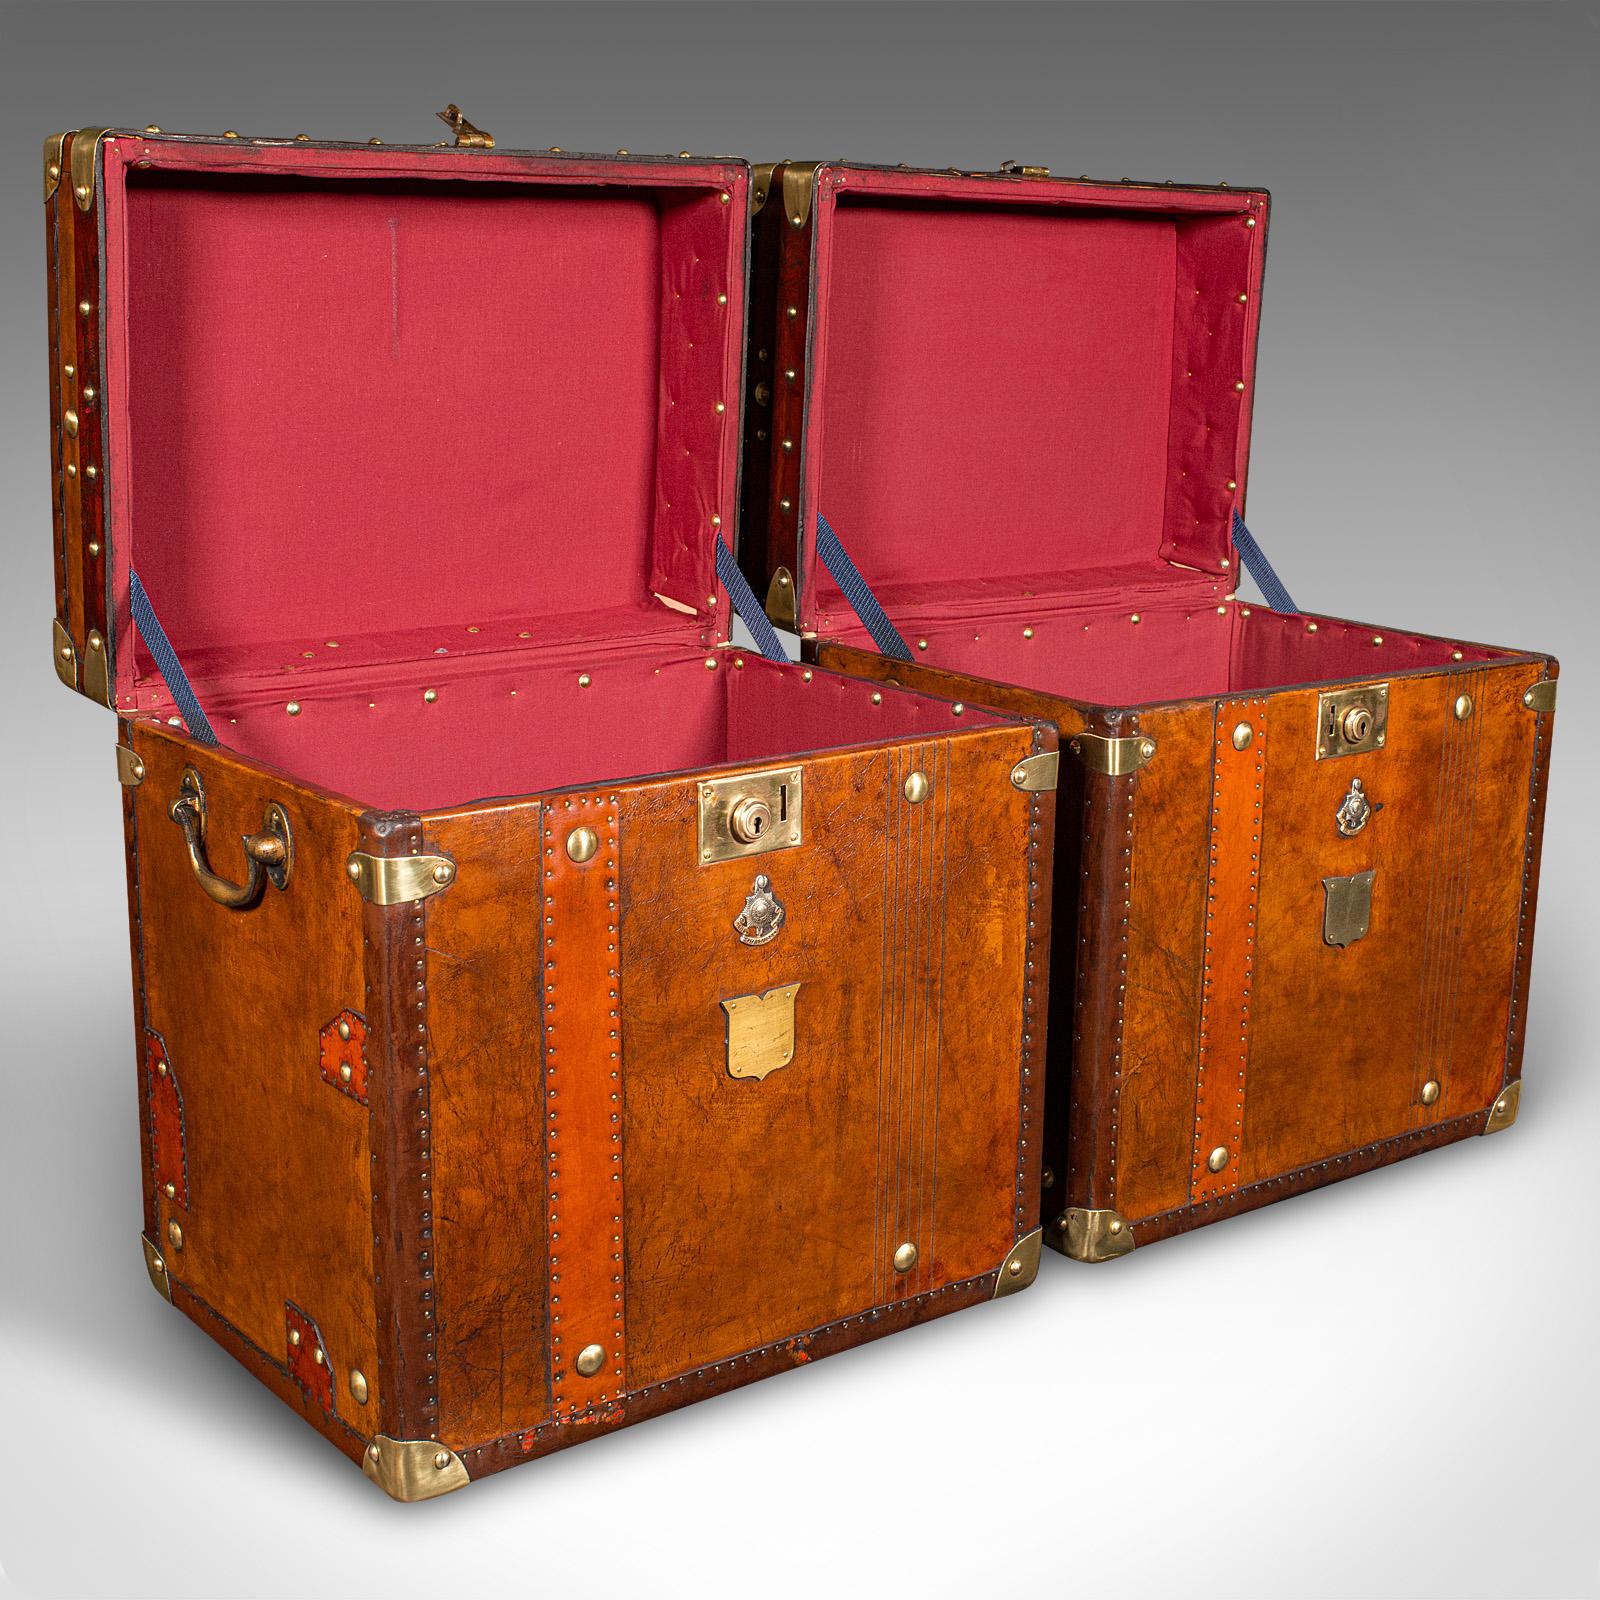 This is a pair of vintage officer's campaign luggage cases. An English, leather and brass bedside nightstand, dating to the late 20th century, circa 1980.

Exquisite casework, with nicely appointed detail and finishes
Displays a desirable aged